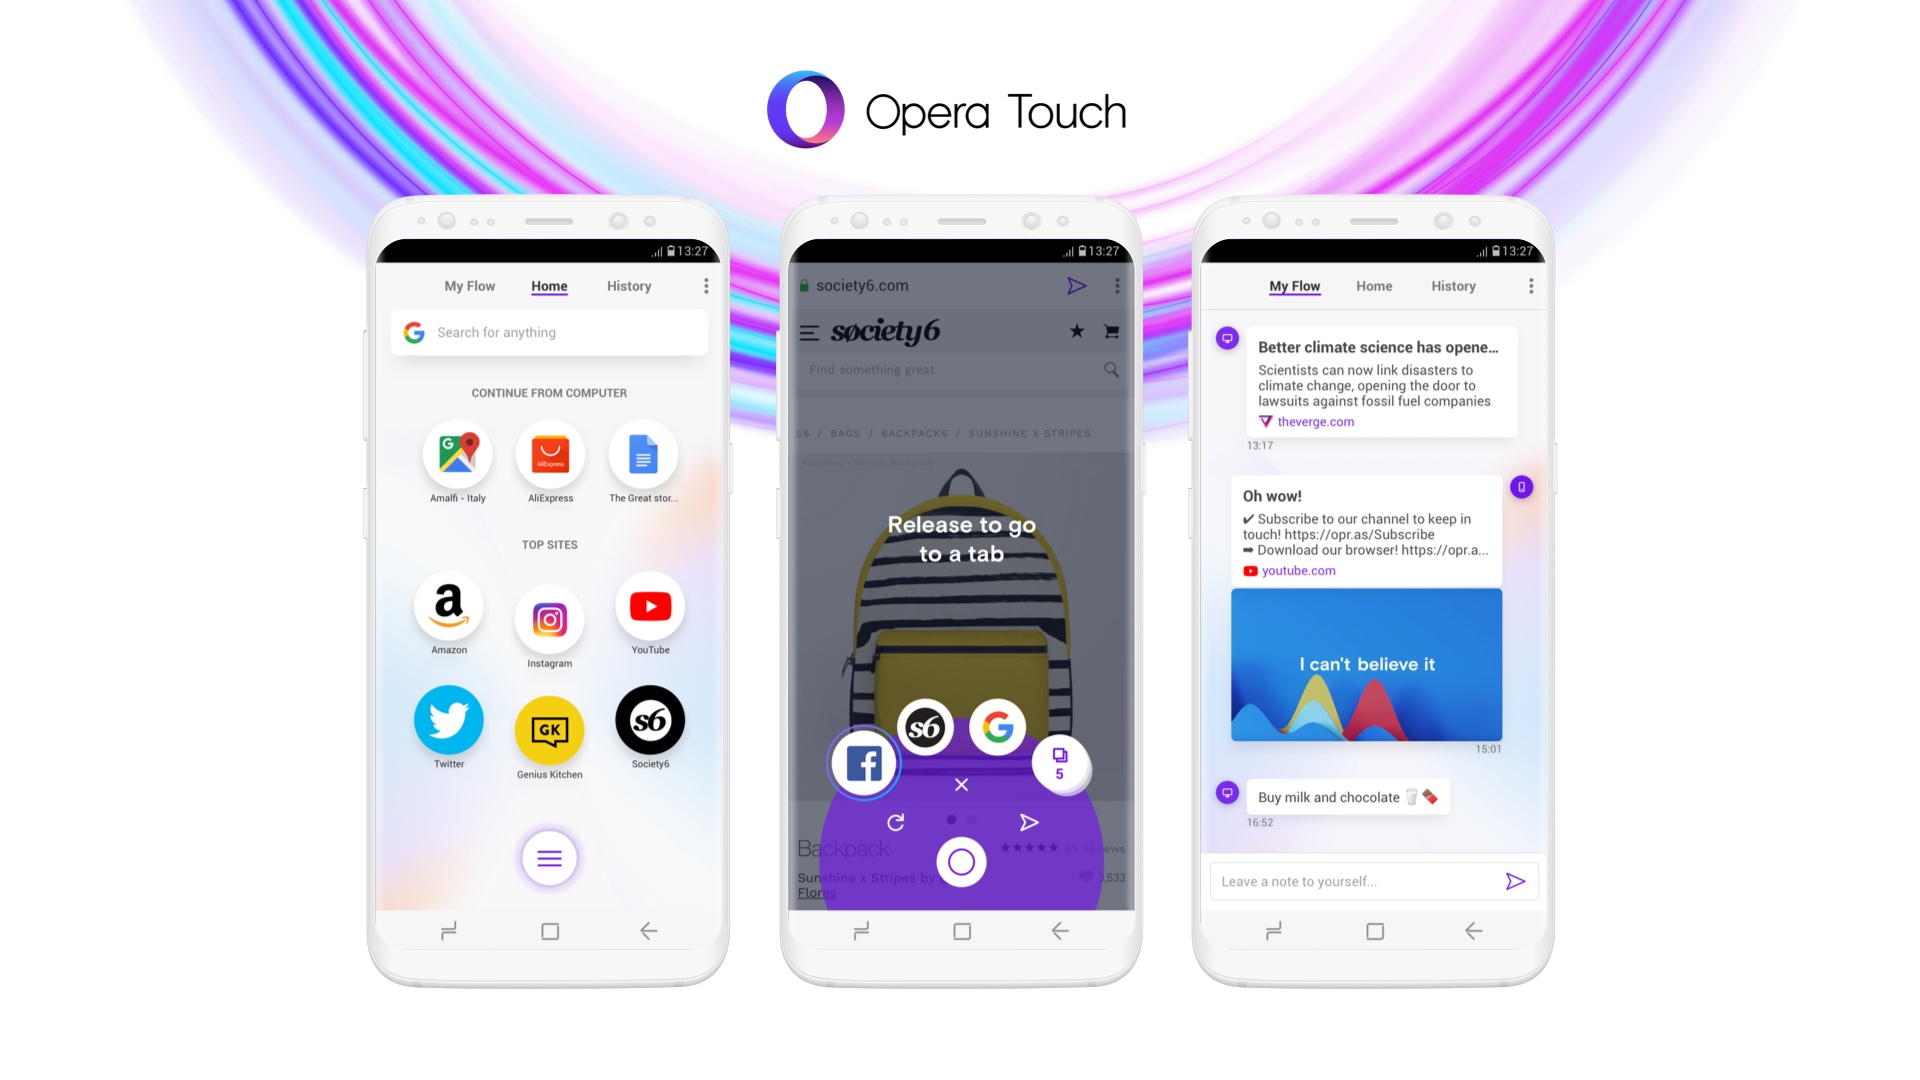 Opera introduces Opera Touch, a cool new mobile browser